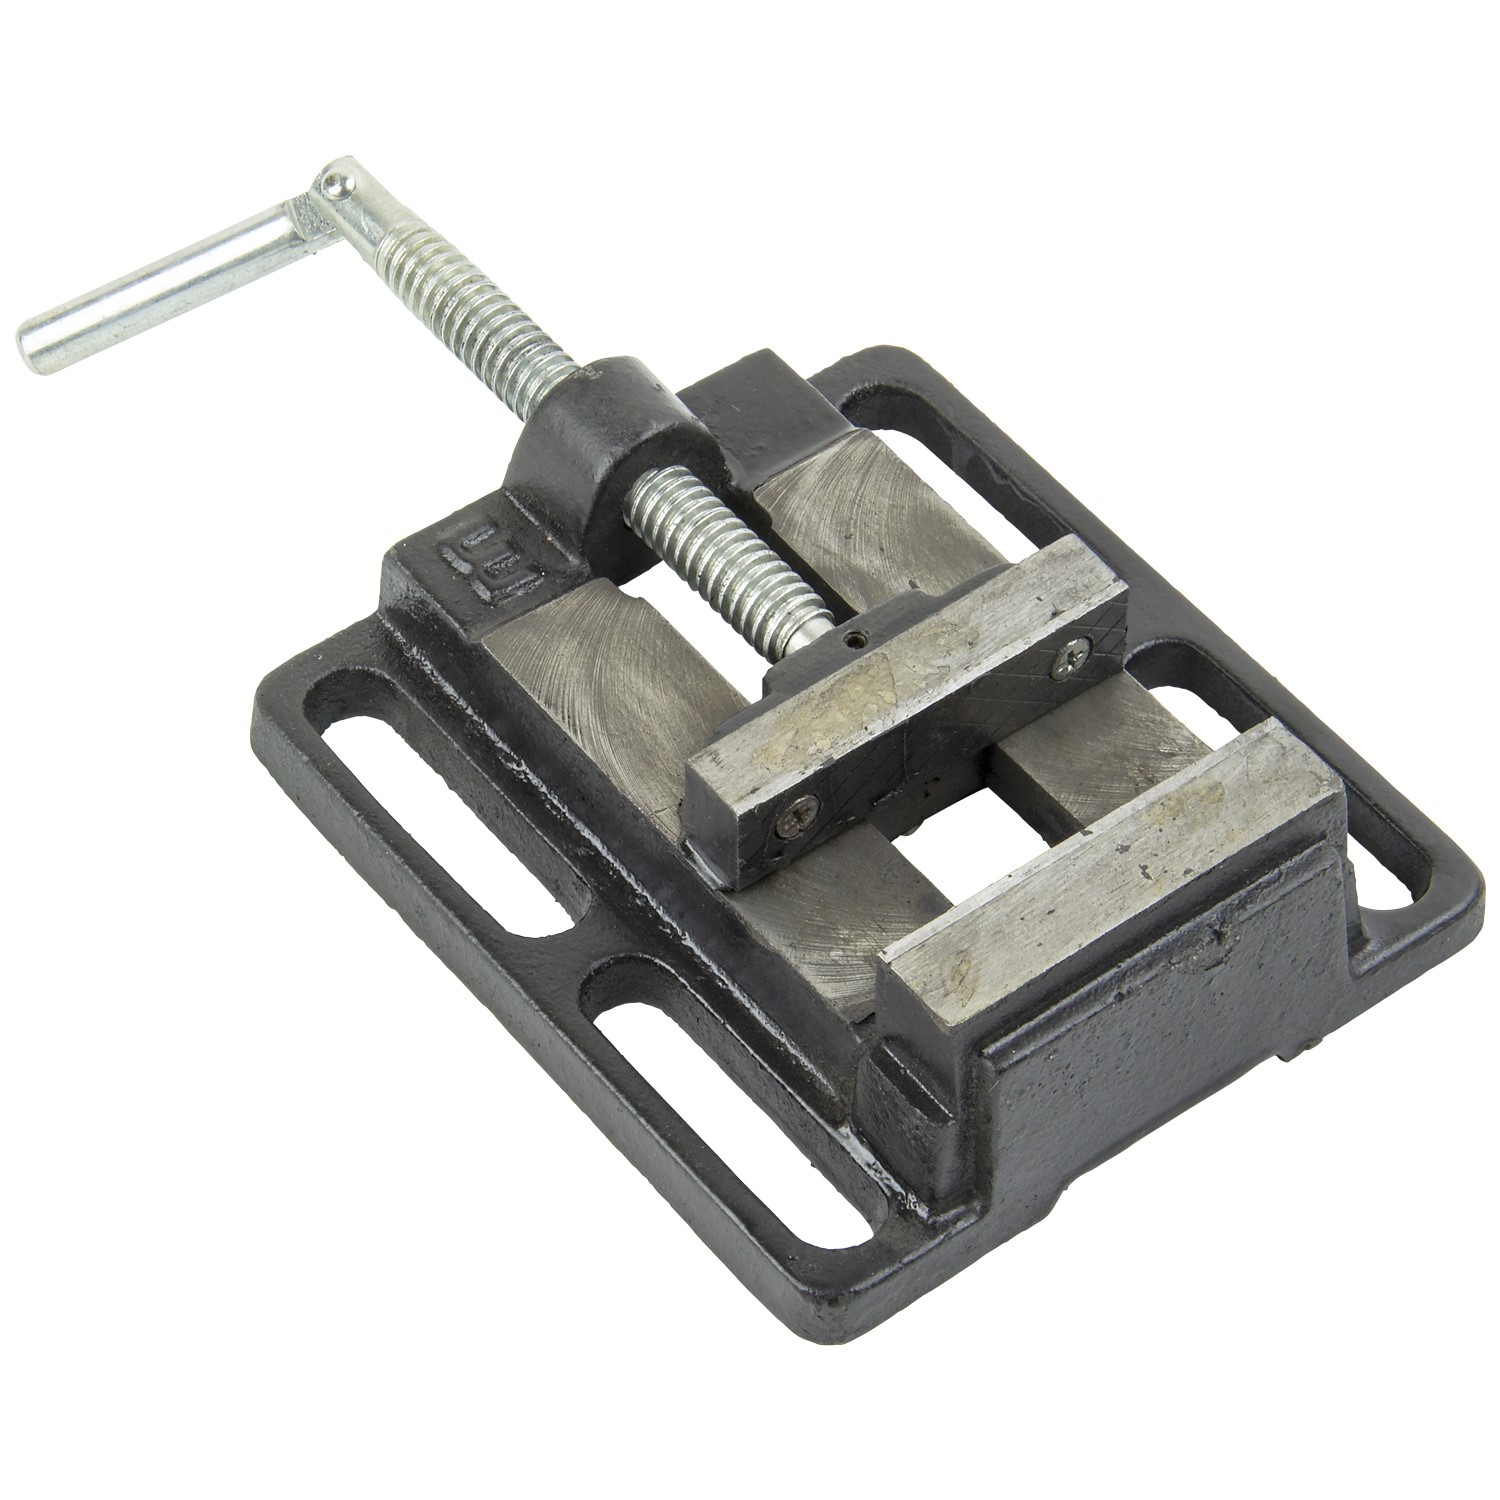 2.5" (63.5mm) vice for pillar drills and presses 01722